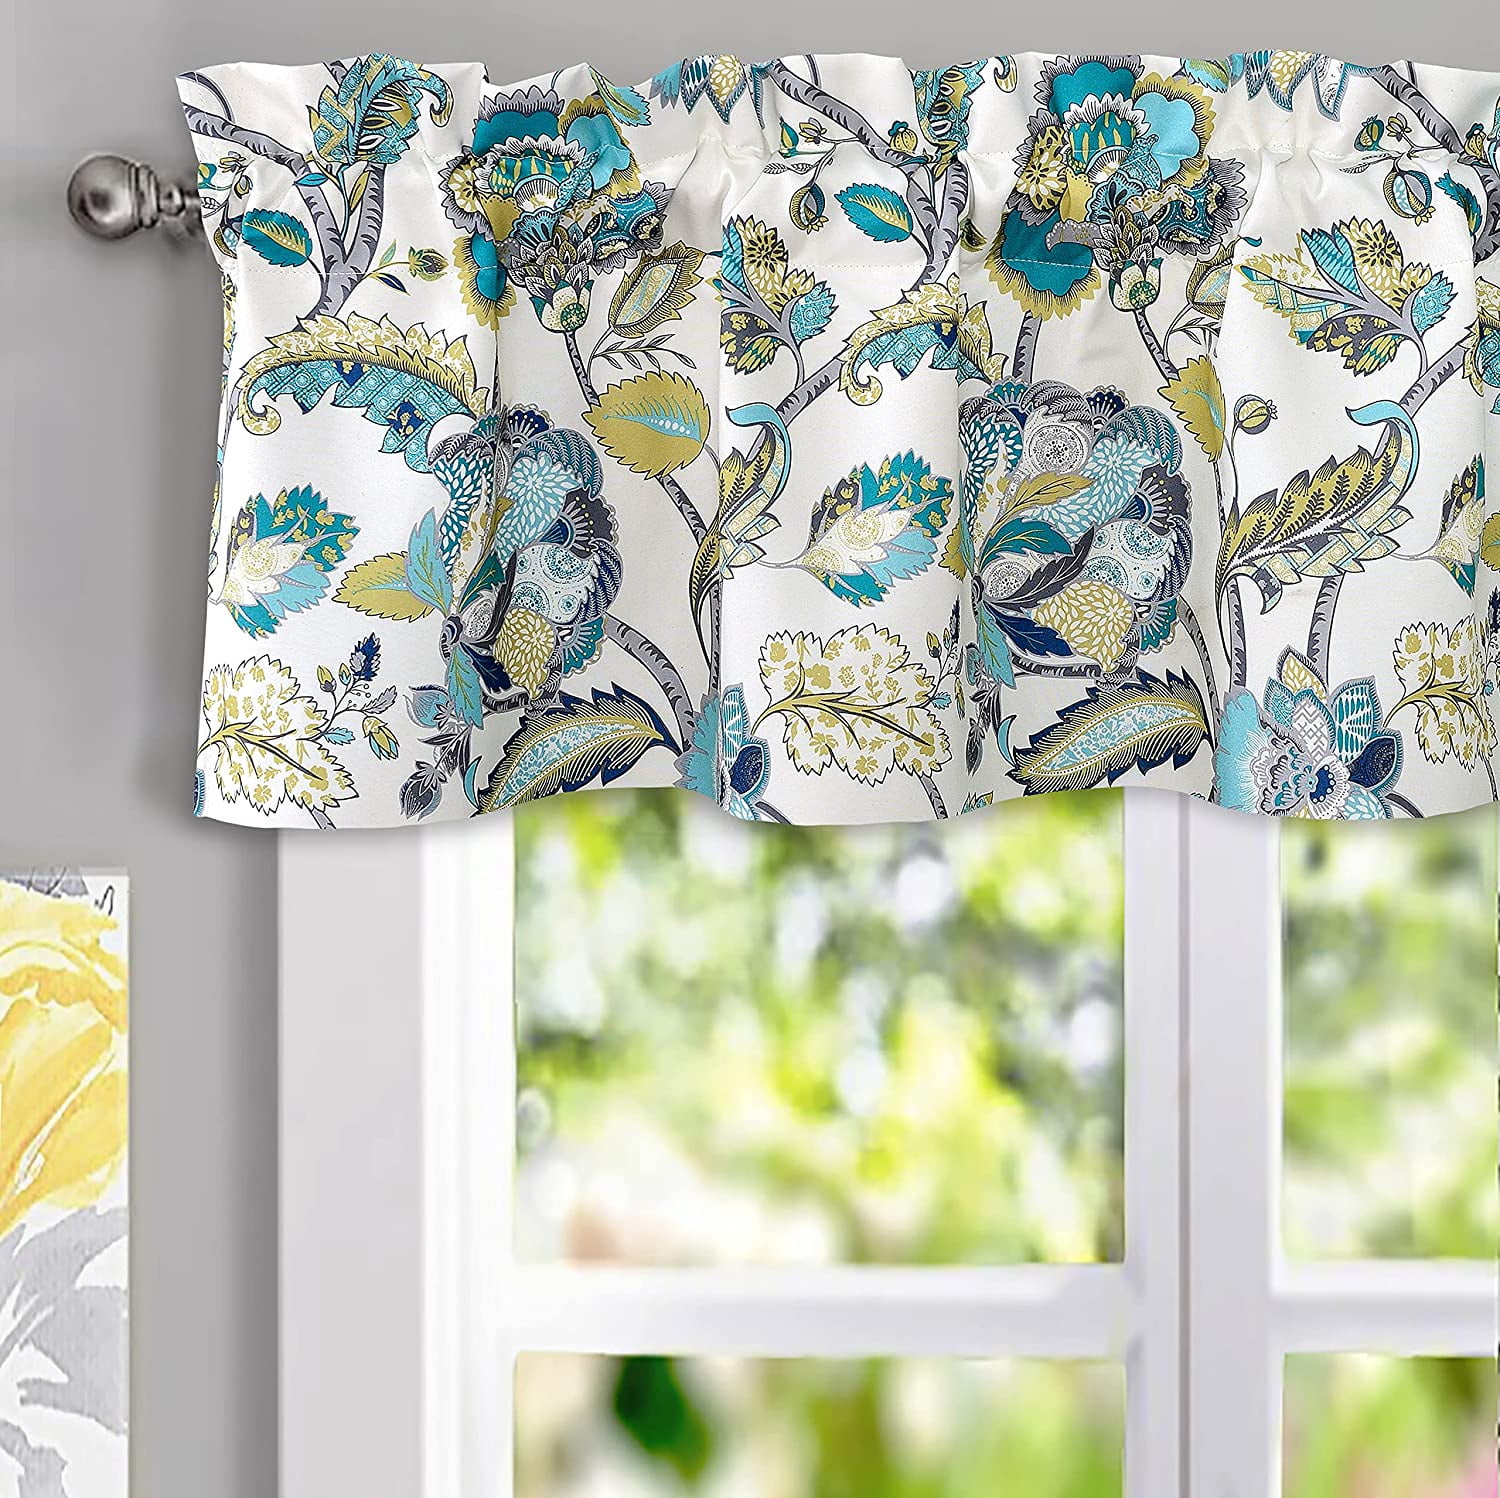 DriftAway Layla Classic America Style Floral Leaves Room Darkening Window Curtain Valance Rod Pocket Single 52 Inch by 14 Inch Plus 2 Inch Header Teal Gray